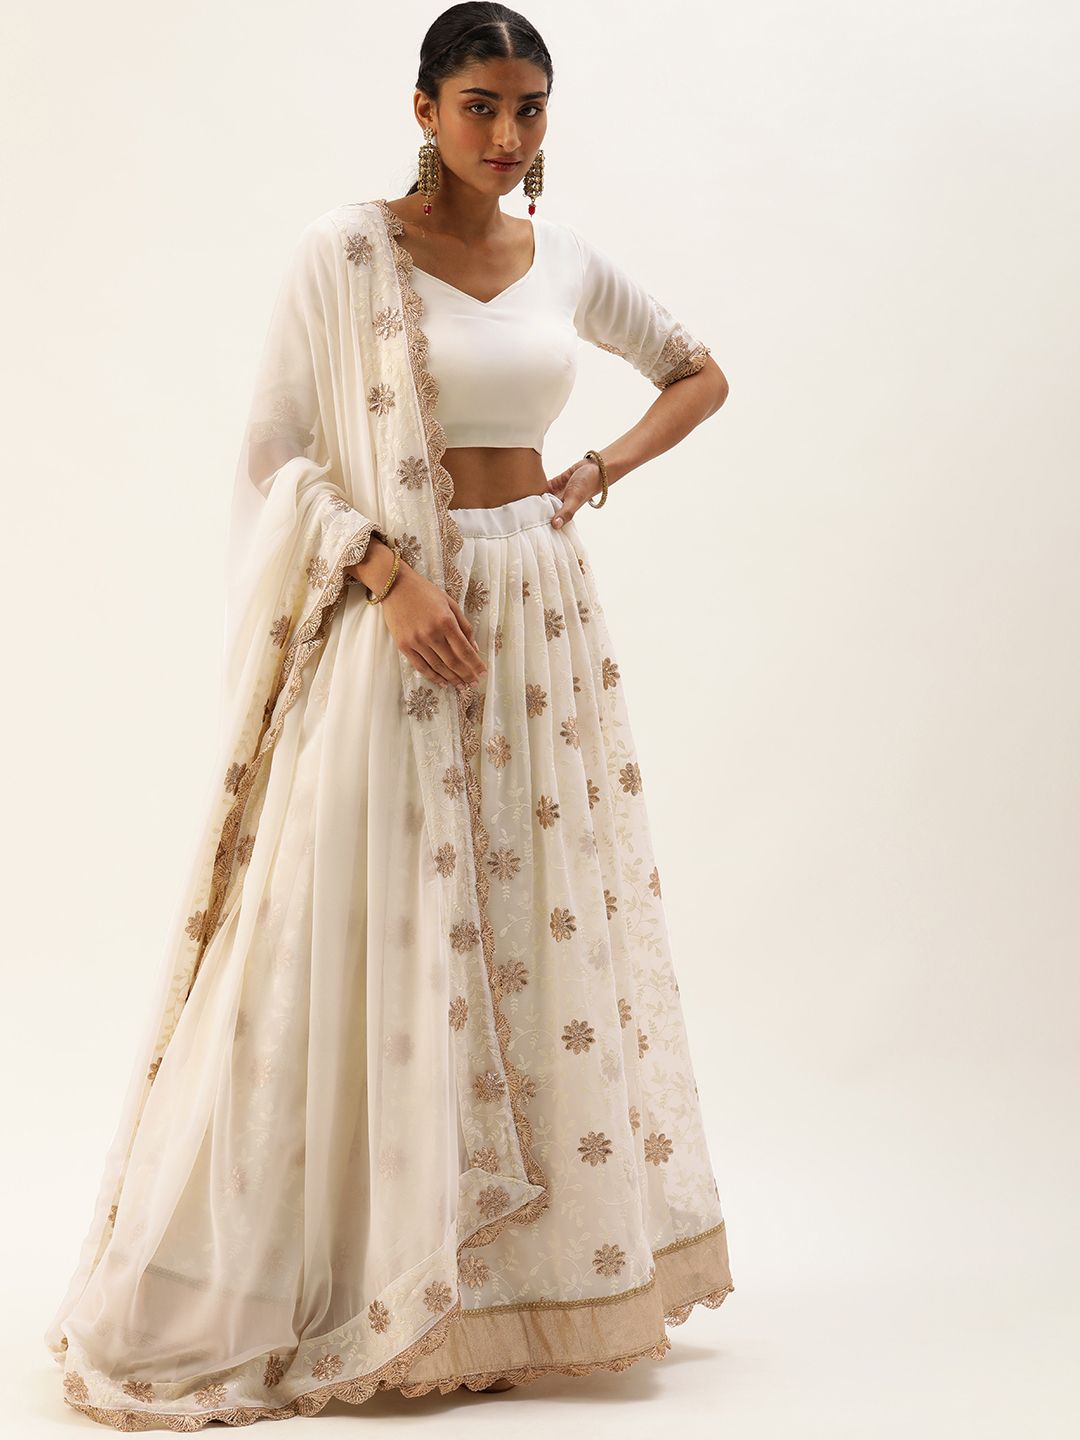 LOOKNBOOK ART Off White Semi-Stitched Lehenga & Unstitched Blouse With Dupatta Price in India